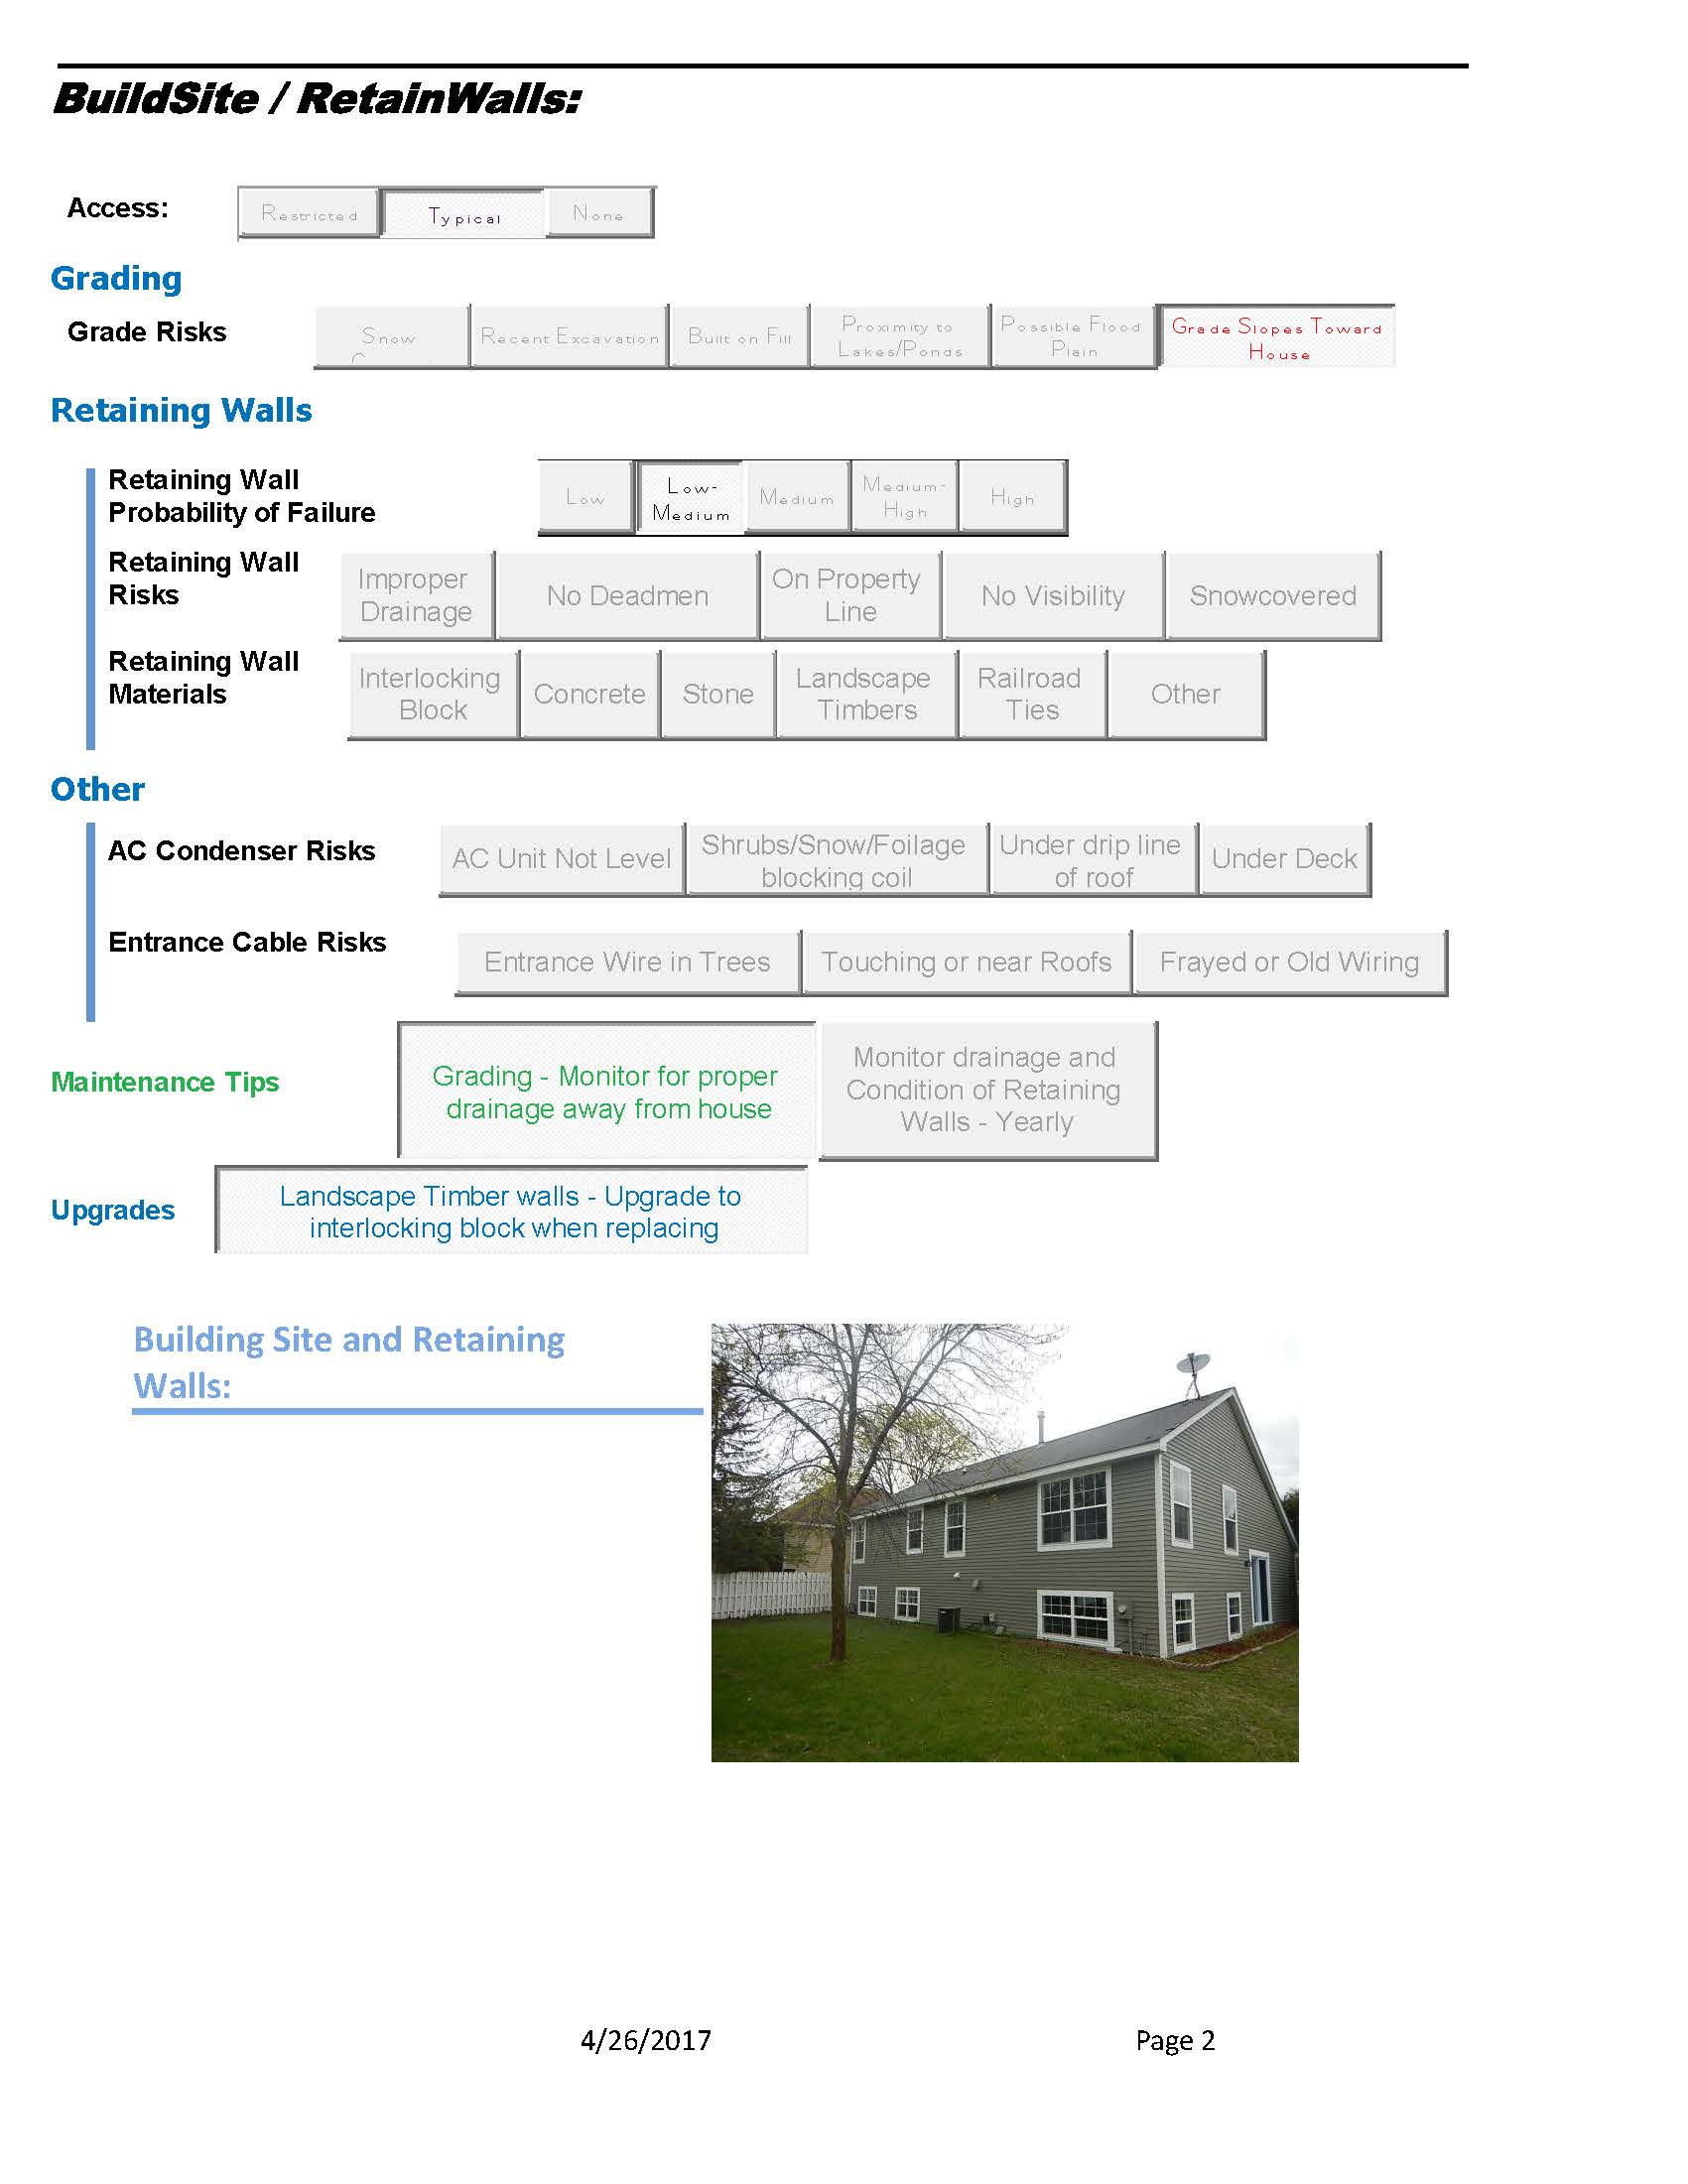 Single Family Example Report._Page_09.jpg